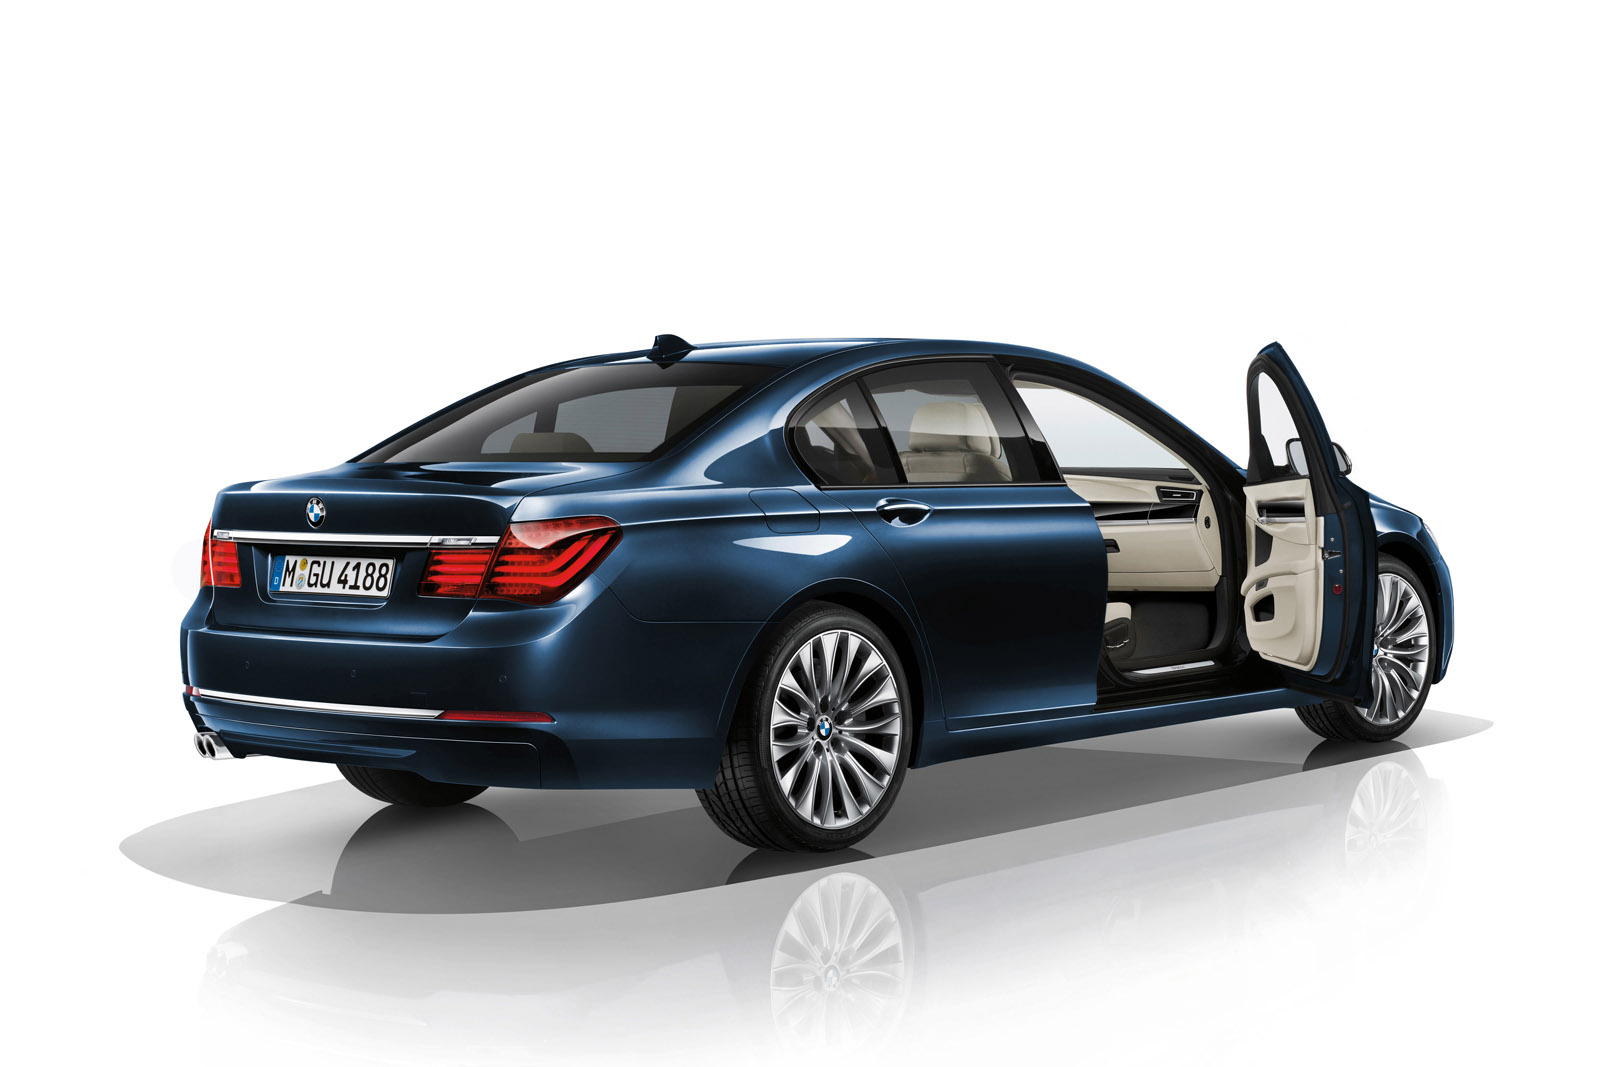 BMW 7 Series Edition Exclusive